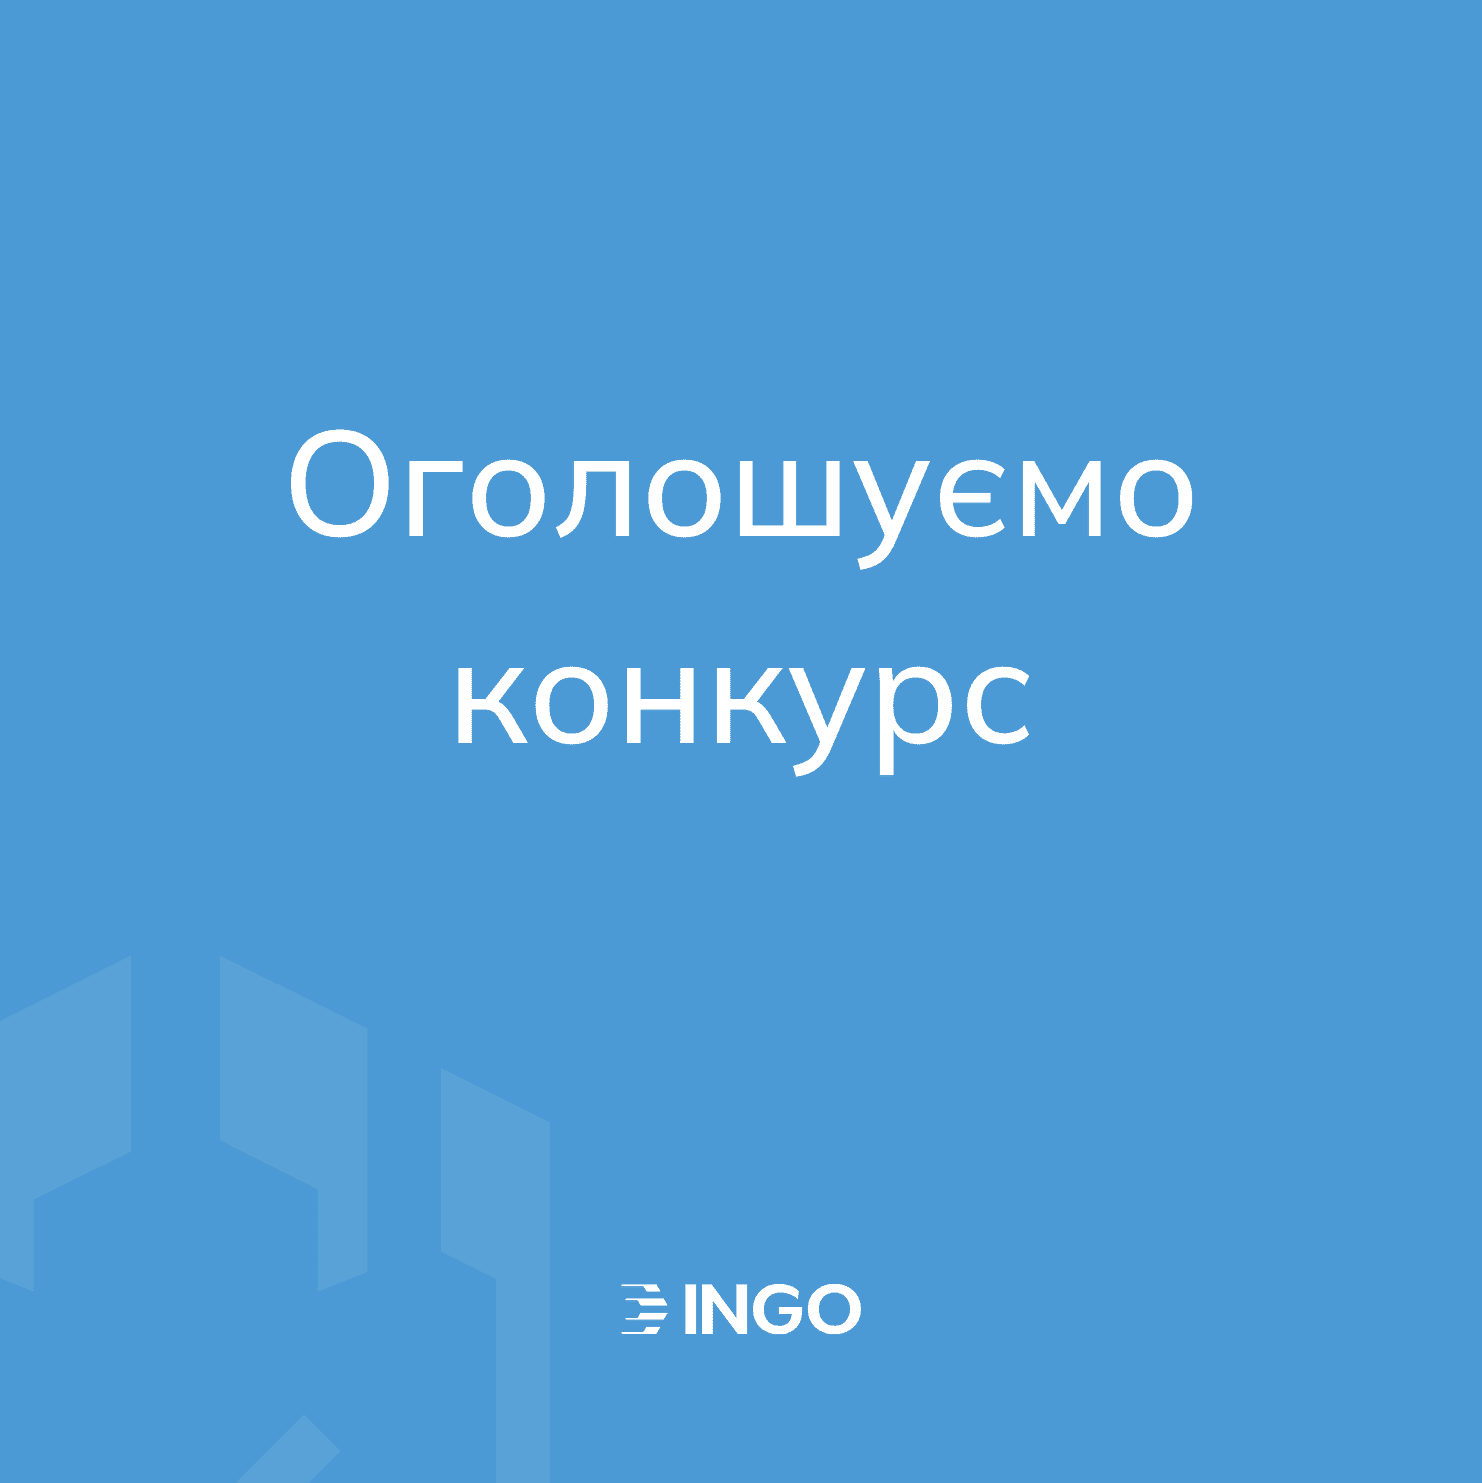 INGO Insurance Company announces an open tender for the selection of a contractor in the field of PR